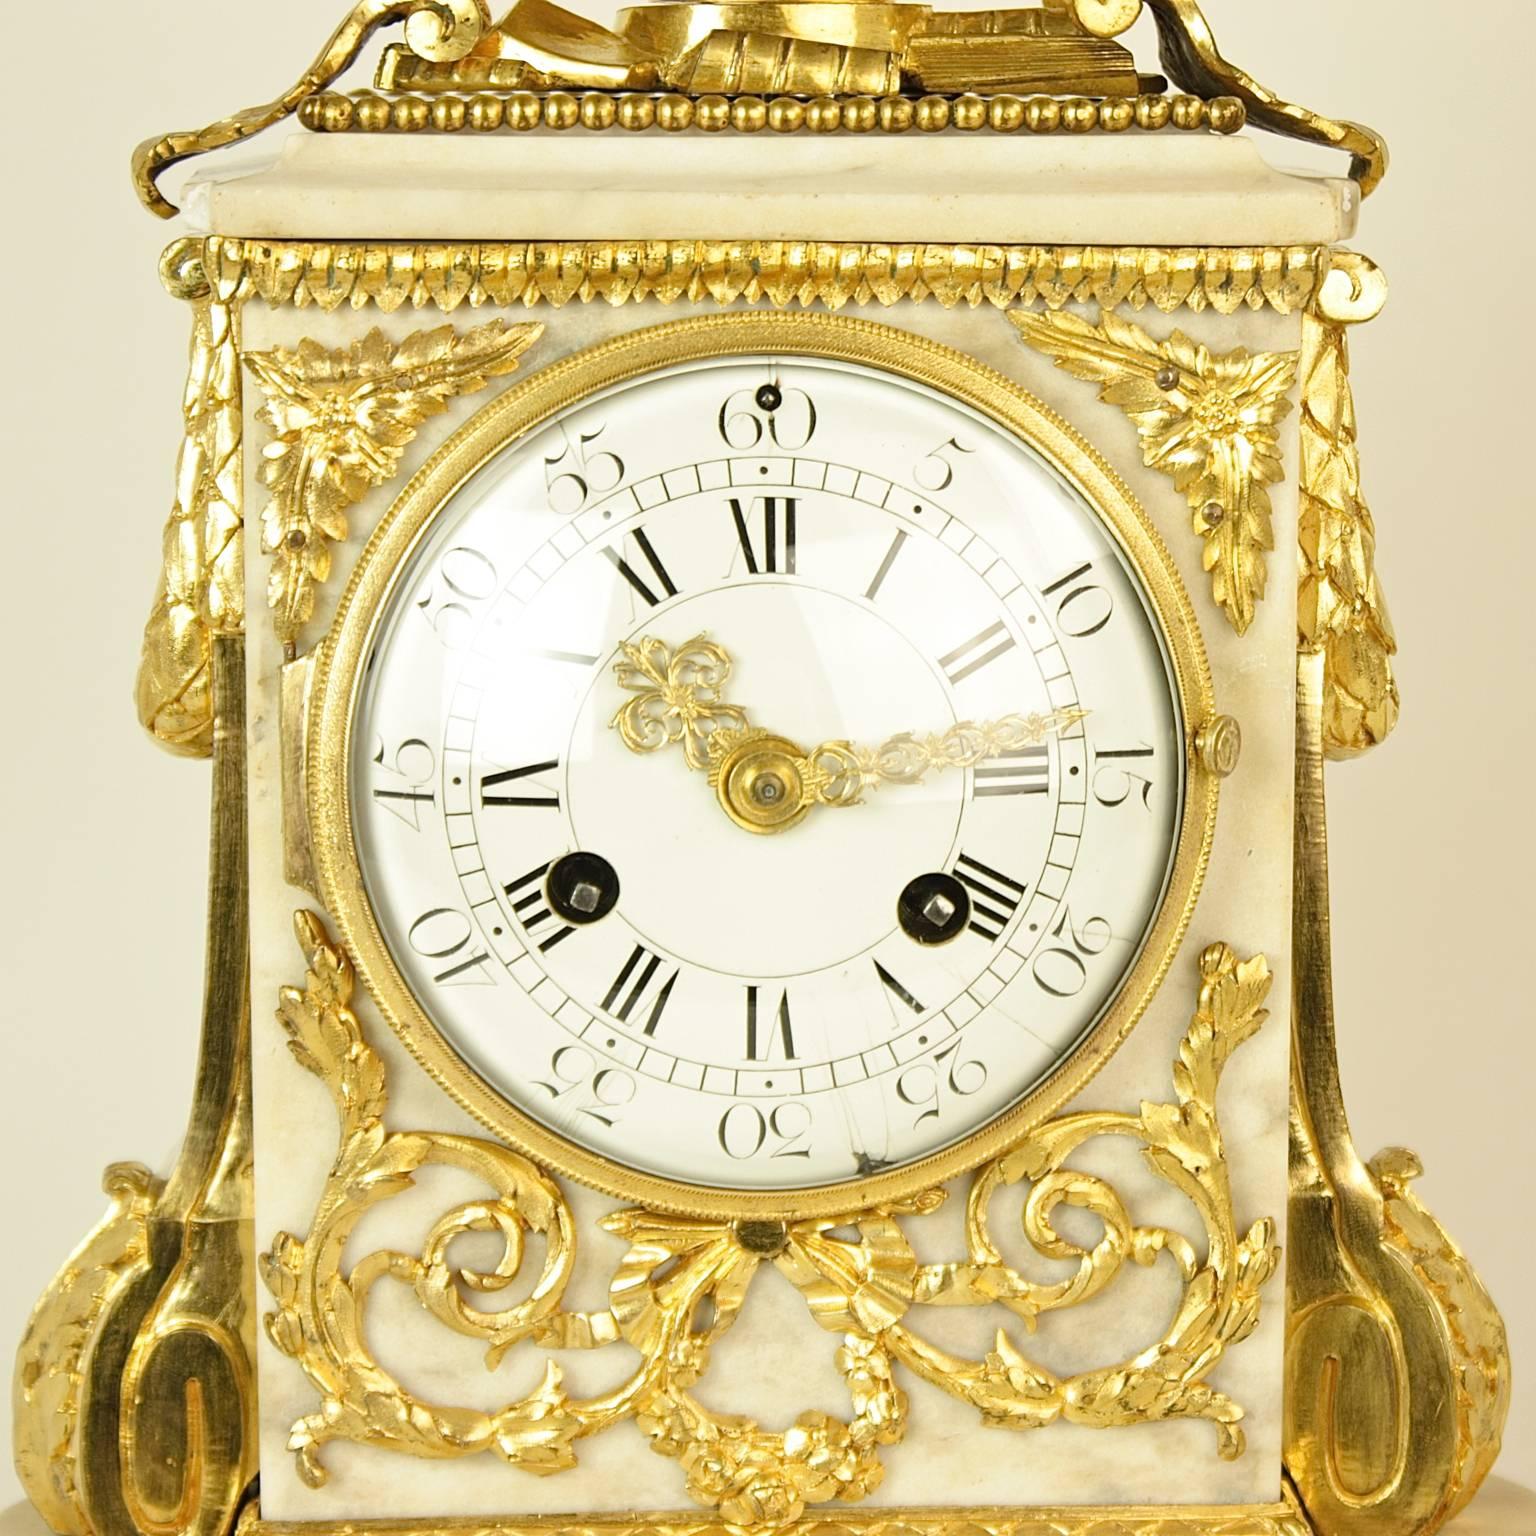 An 18th Century Louis XVI Gilt-Bronze and White Marble Mantel Clock, circa 1780

An 18th century Louis XVI gilt-bronze and white marble clock, the white enamel dial with Roman and Arabic numerals, contained within a plinth shaped case, surmounted by